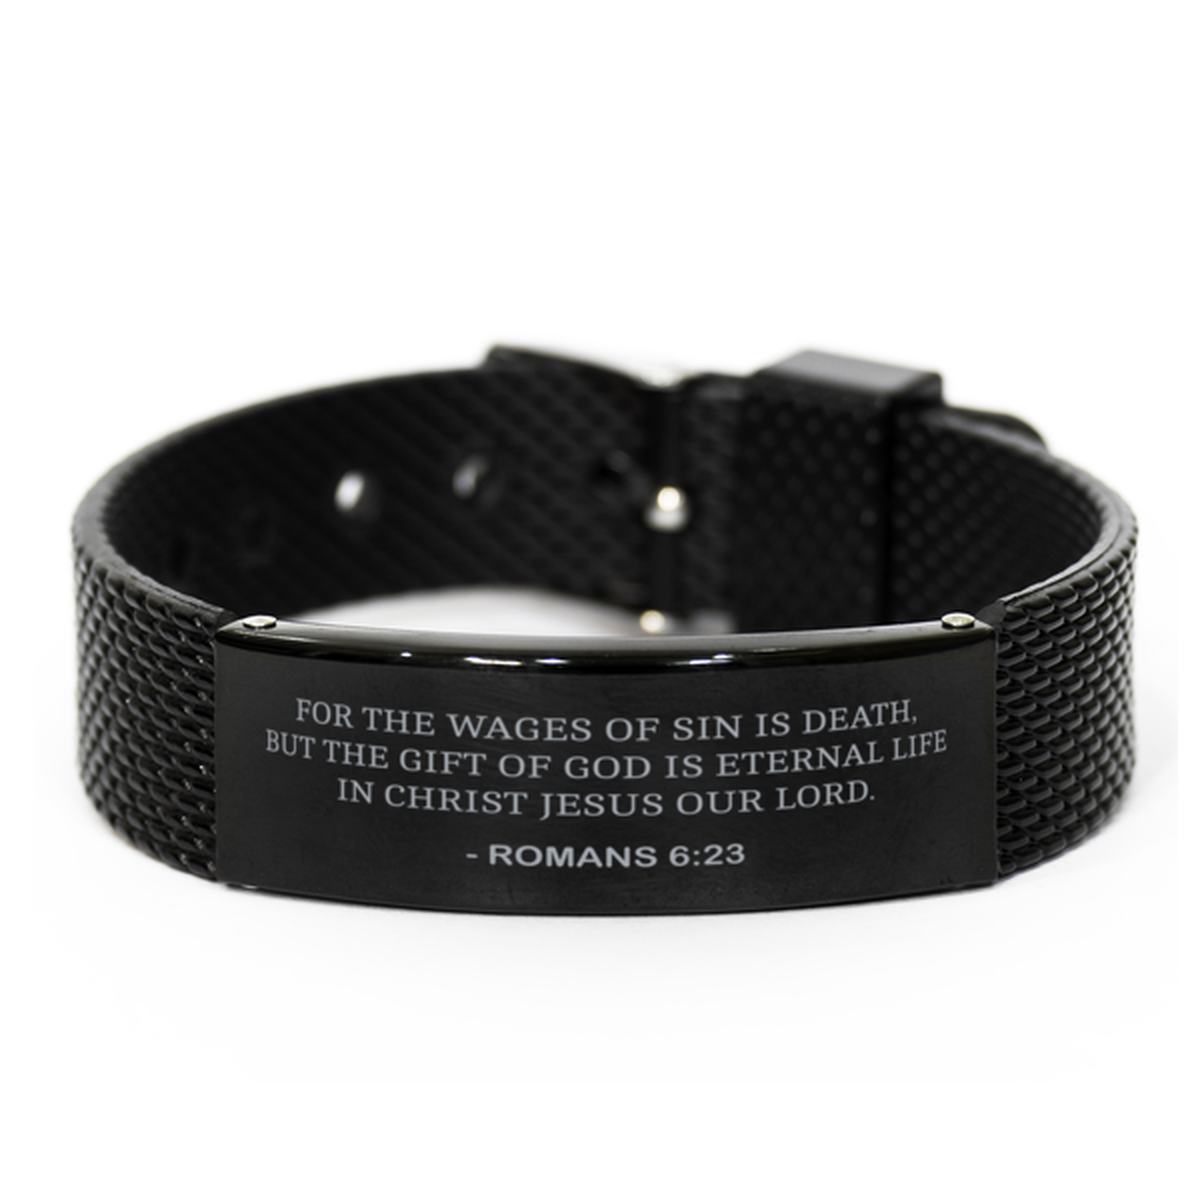 Christian Black Bracelet,, Romans 6:23 For The Wages Of Sin Is Death, But The Gift Of, Motivational Bible Verse Gifts For Men Women